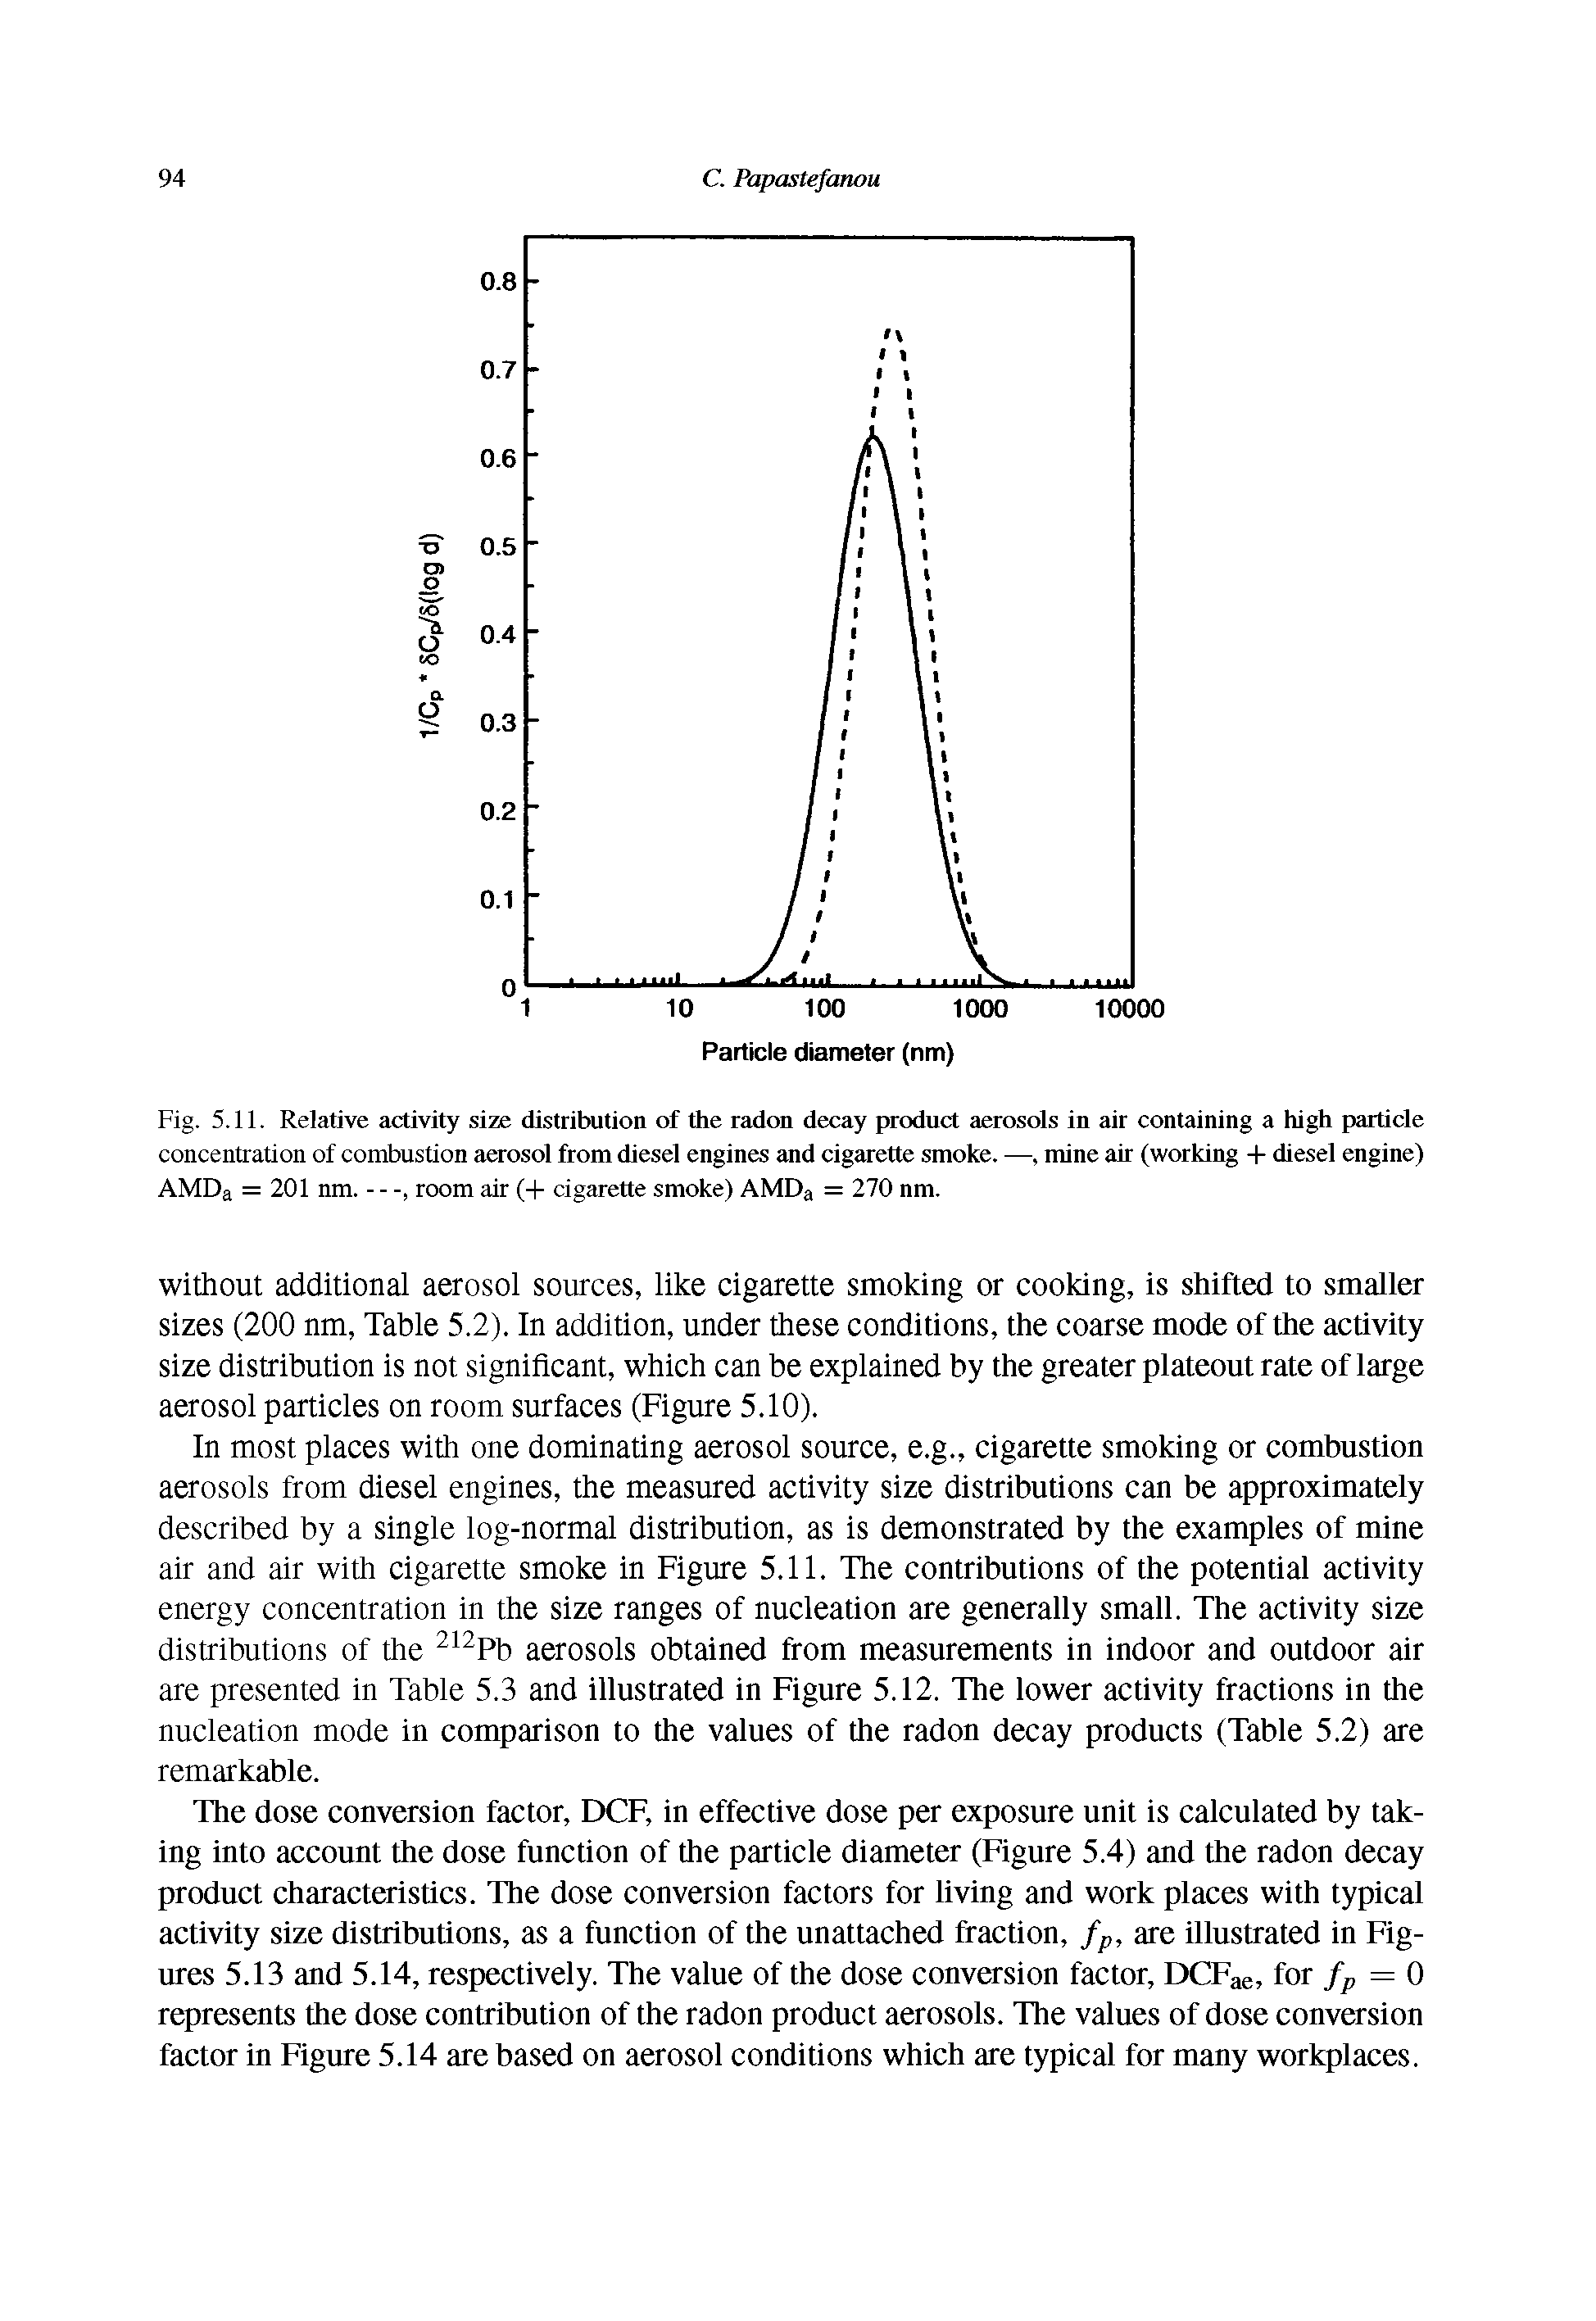 Fig. 5.11. Relative activity size distribution of the radon decay product aerosols in air containing a high particle concentration of combustion aerosol from diesel engines and cigarette smoke. —, mine air (working + diesel engine) AMDa = 201 nm. - - room air (+ cigarette smoke) AMDa = 270 nm.